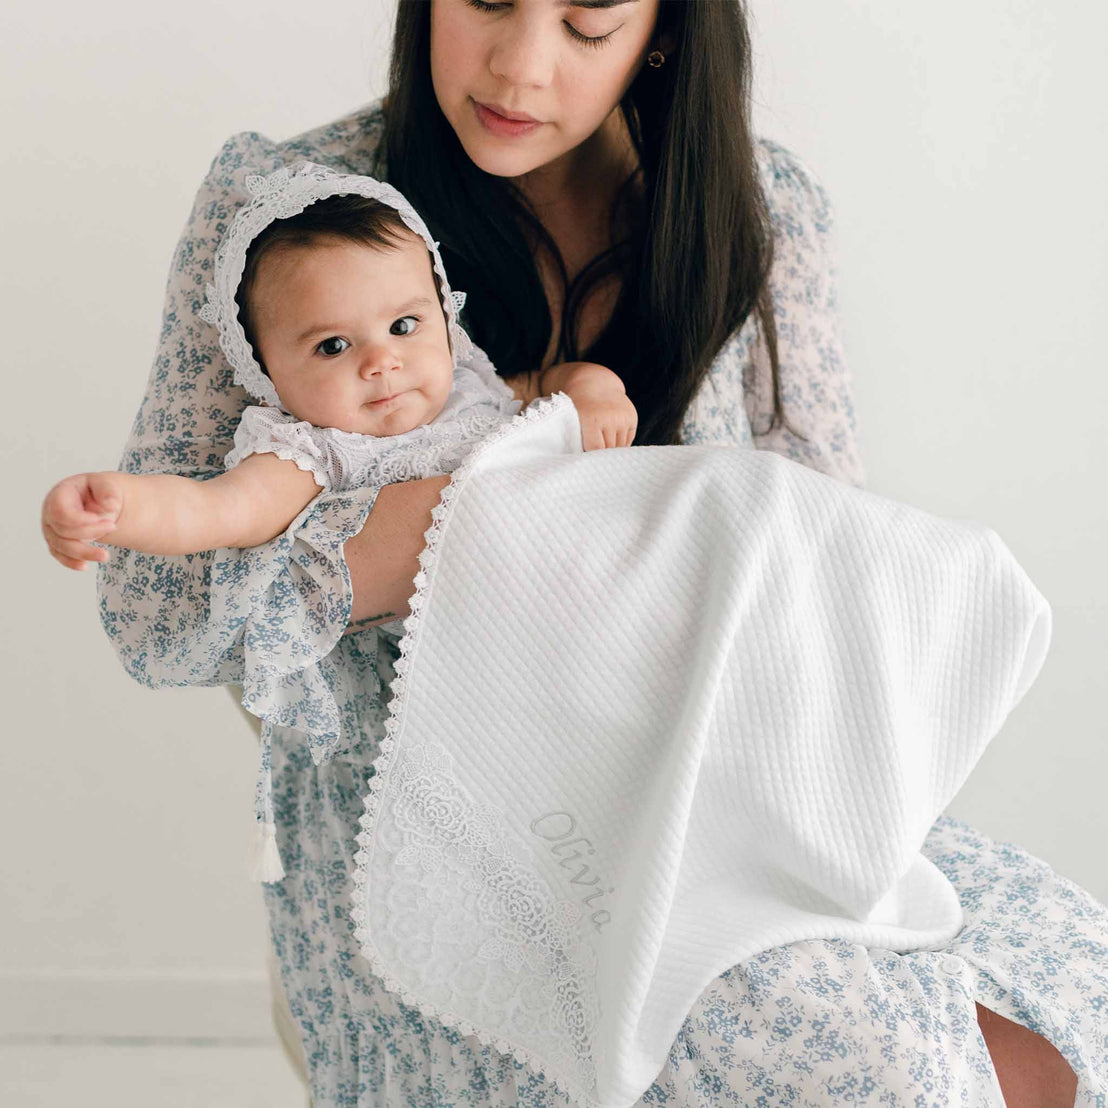 A woman cradles a baby wearing a bonnet, as they both pose for a christening portrait. The baby, dressed in white, looks directly at the camera, while an Olivia Personalized Blanket reading "Olivia" is draped over their laps.